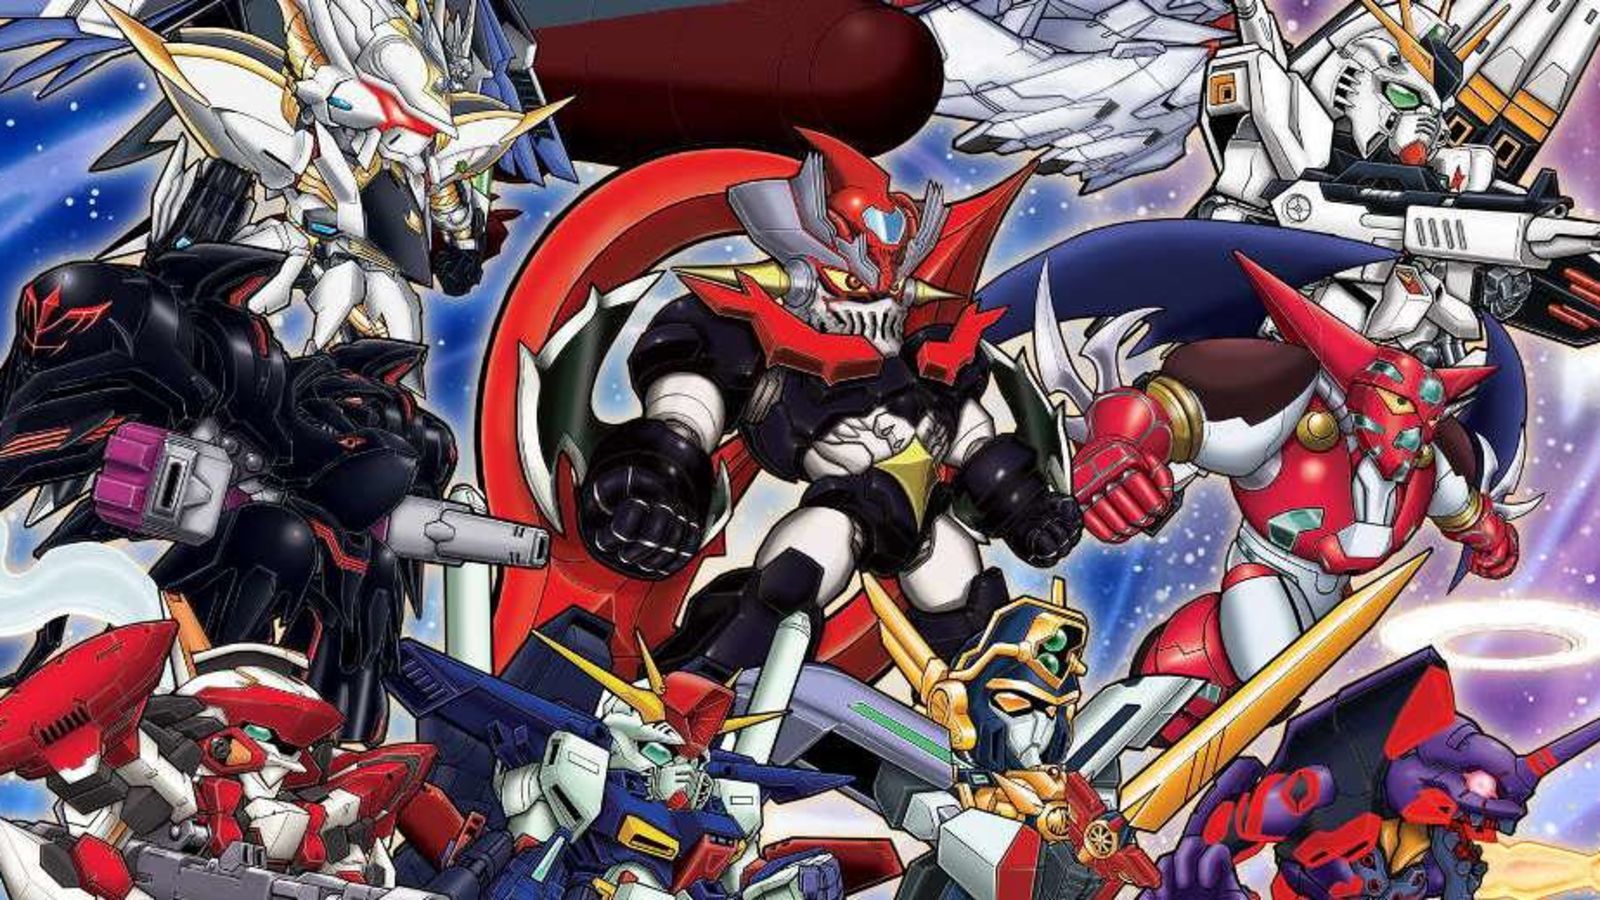 Super Robot Wars V Launching On PC This October